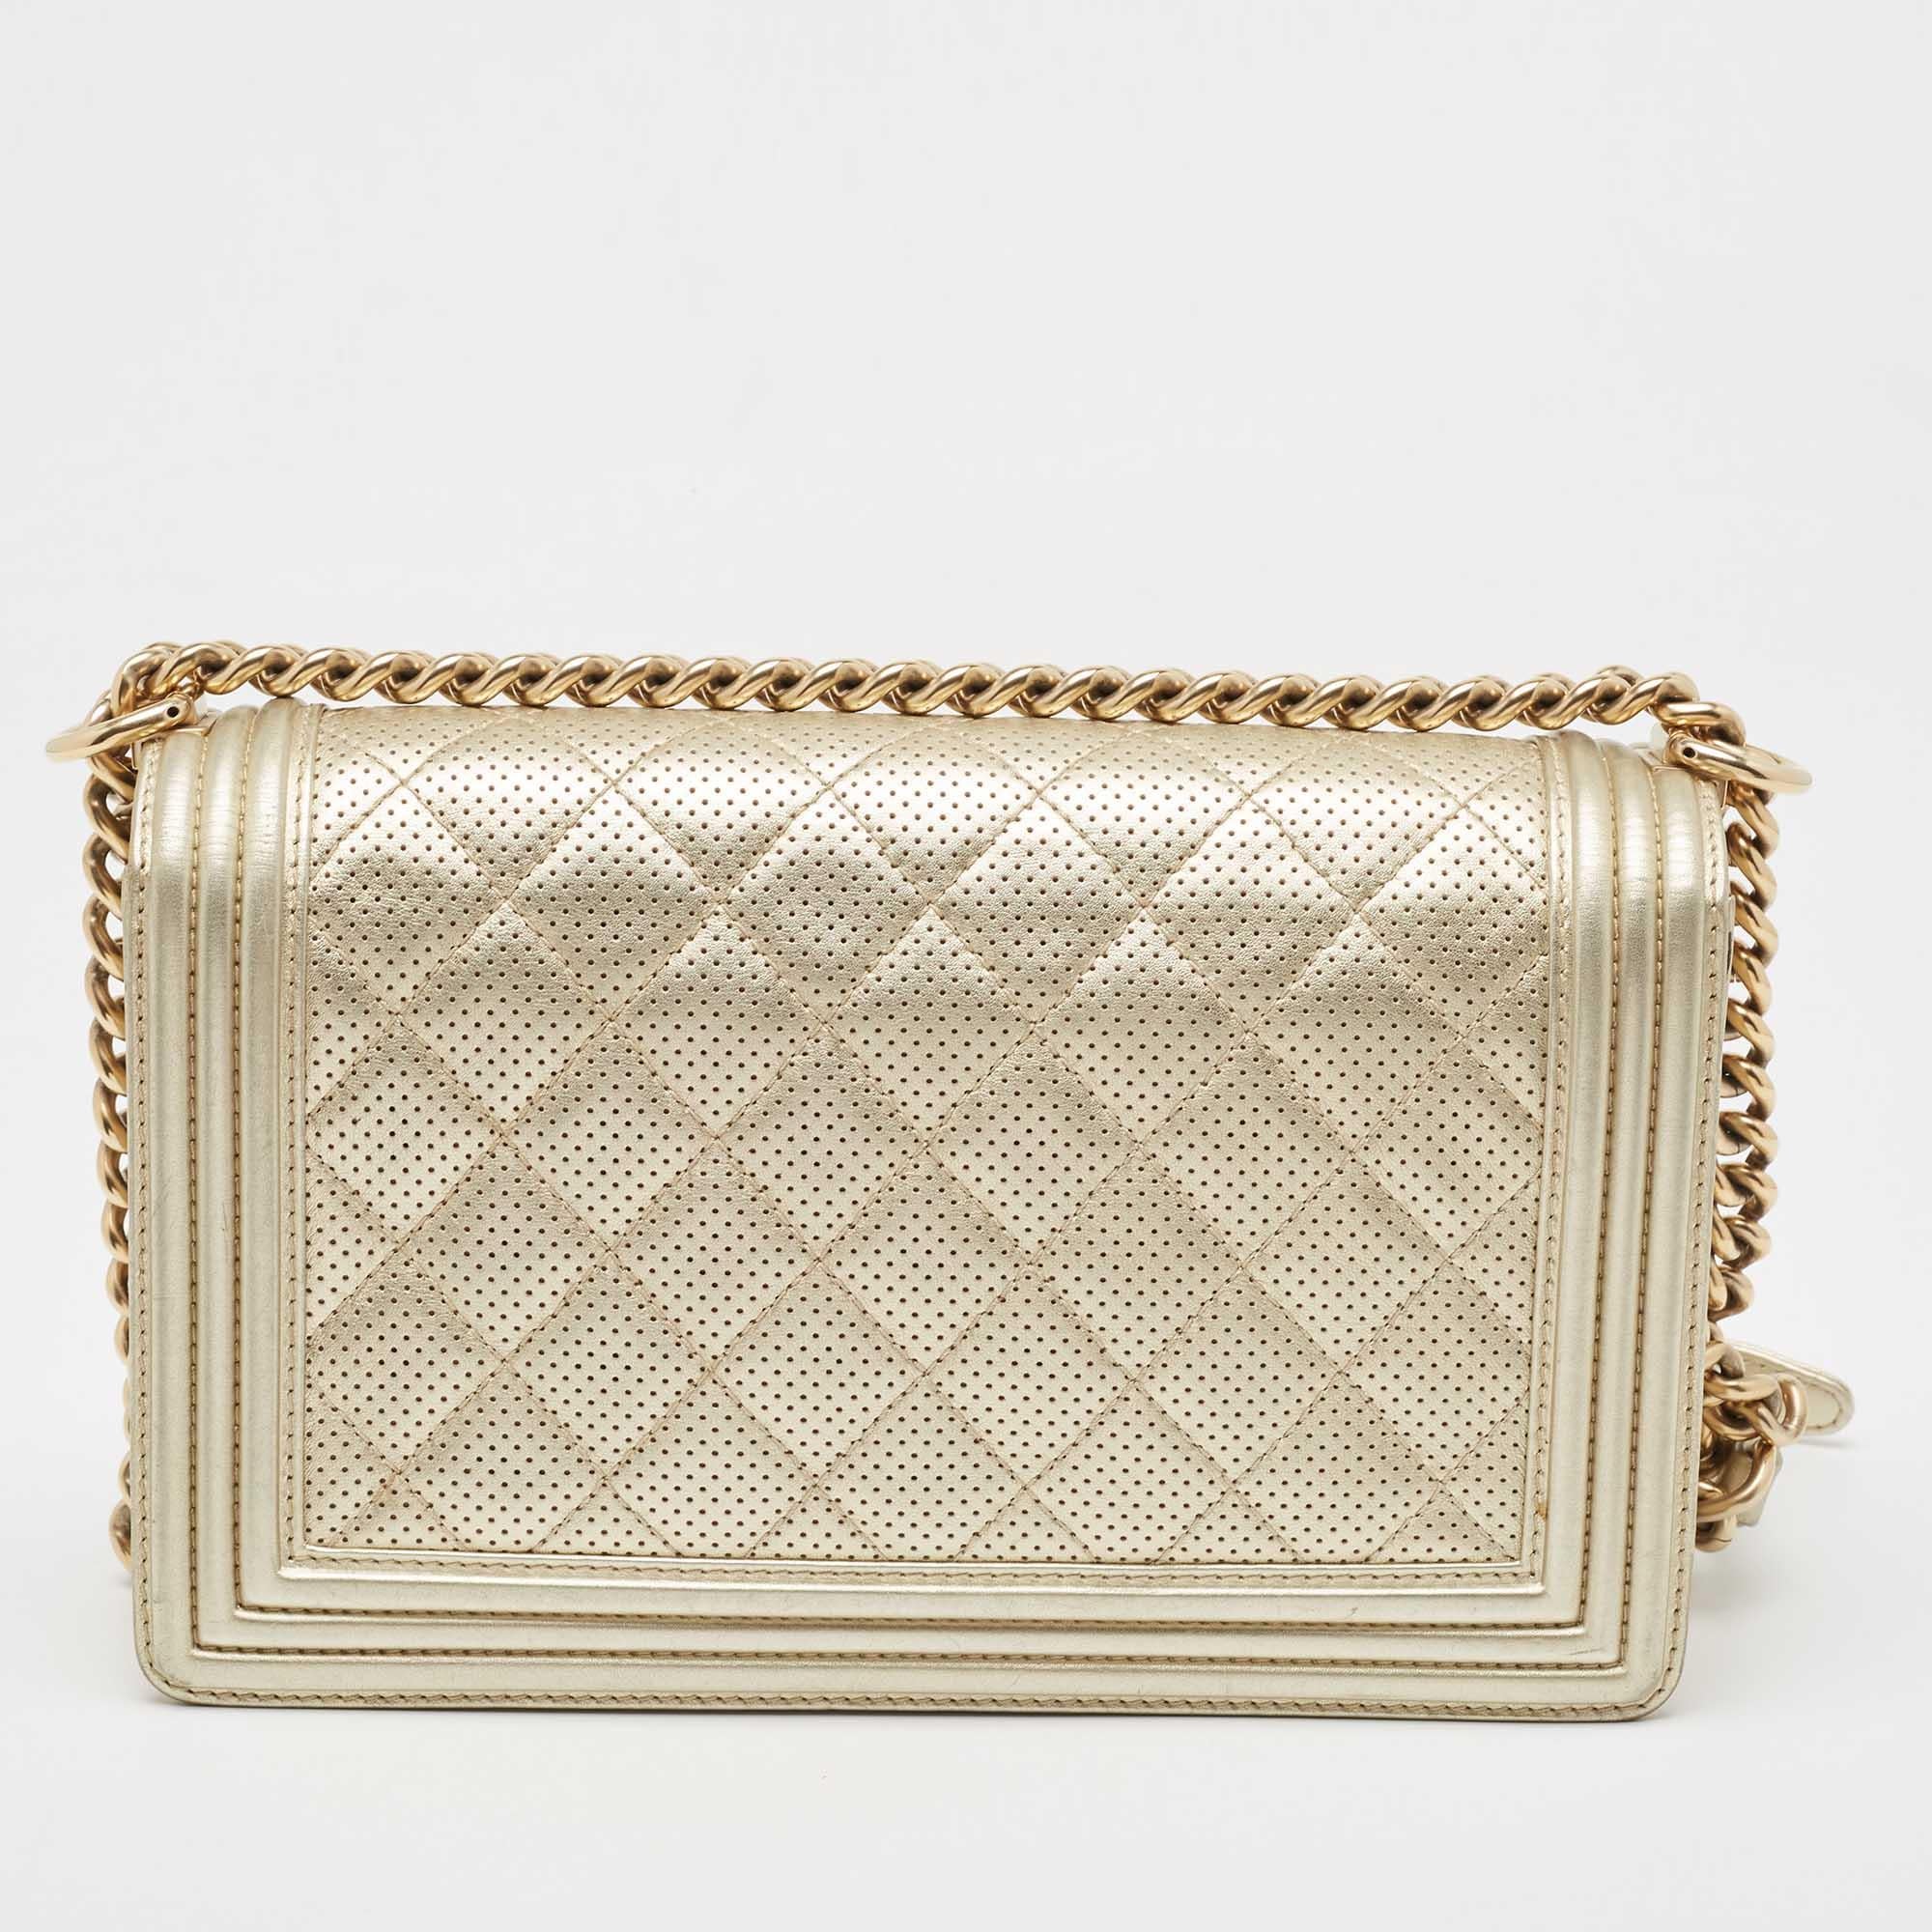 Chanel Light Gold Perforated Leather New Medium Boy Flap Bag 7